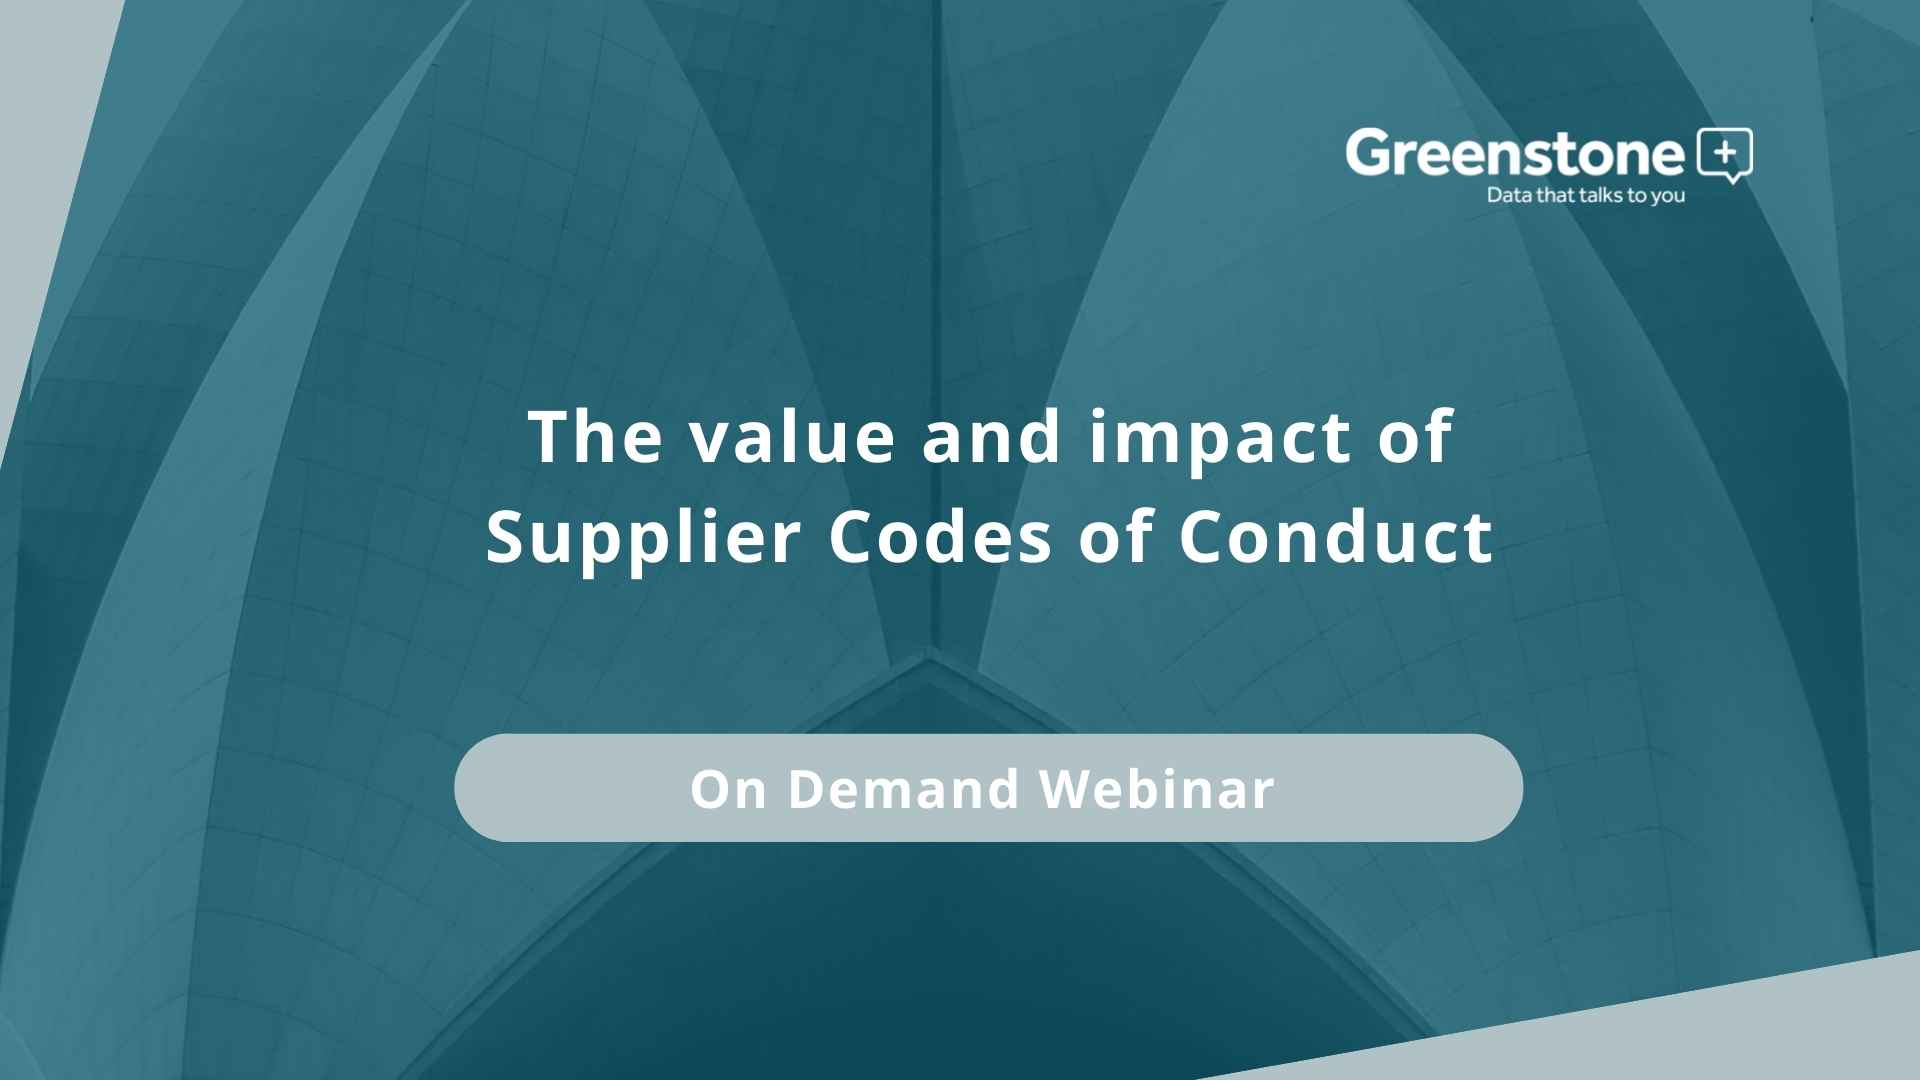 The value and impact of Supplier Codes of Conduct